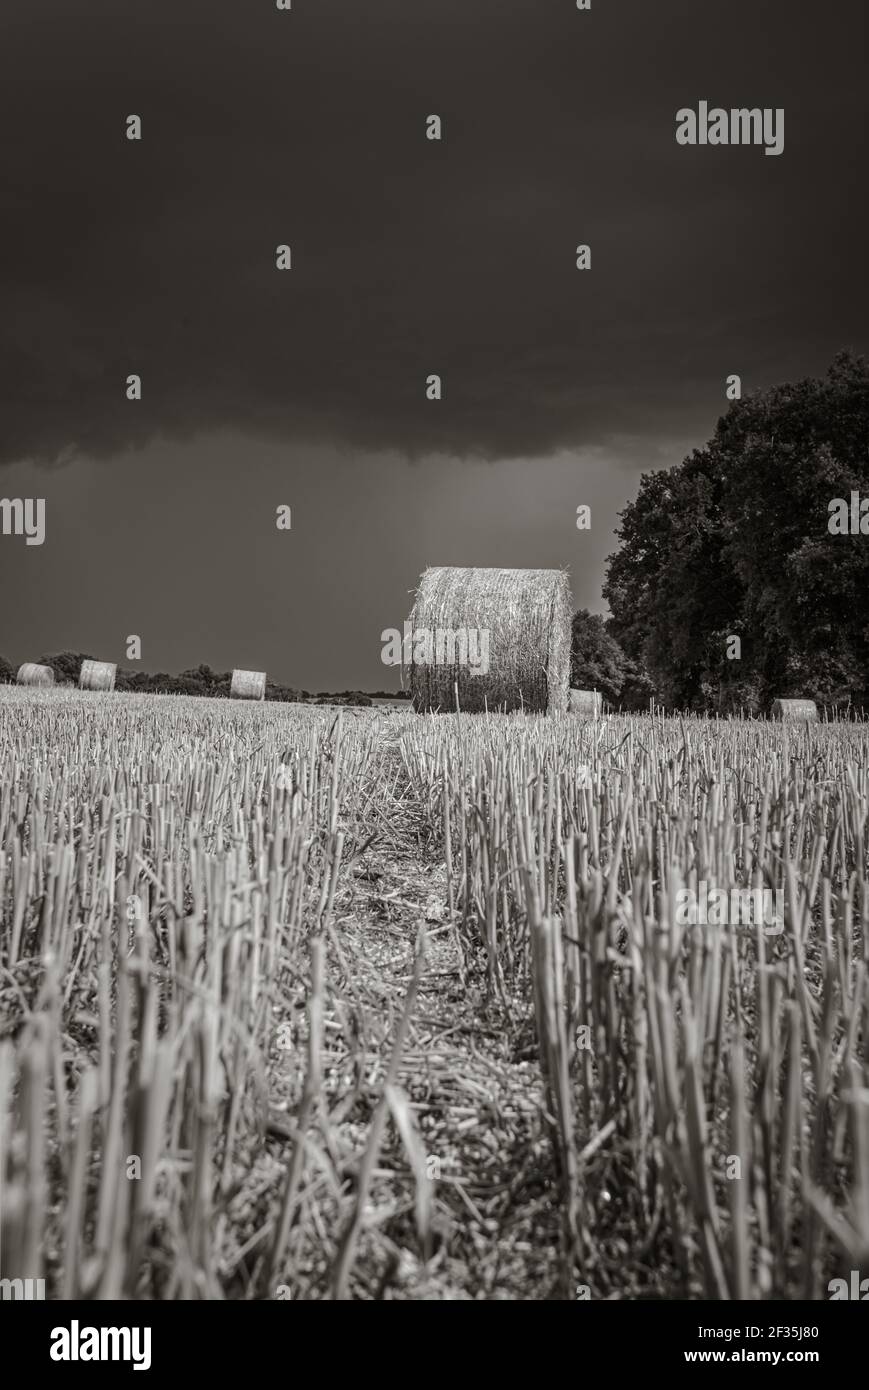 Black and white low angle view of straw bale on freshly harvested grain field. Countryside before summer thunderstorm. Stock Photo